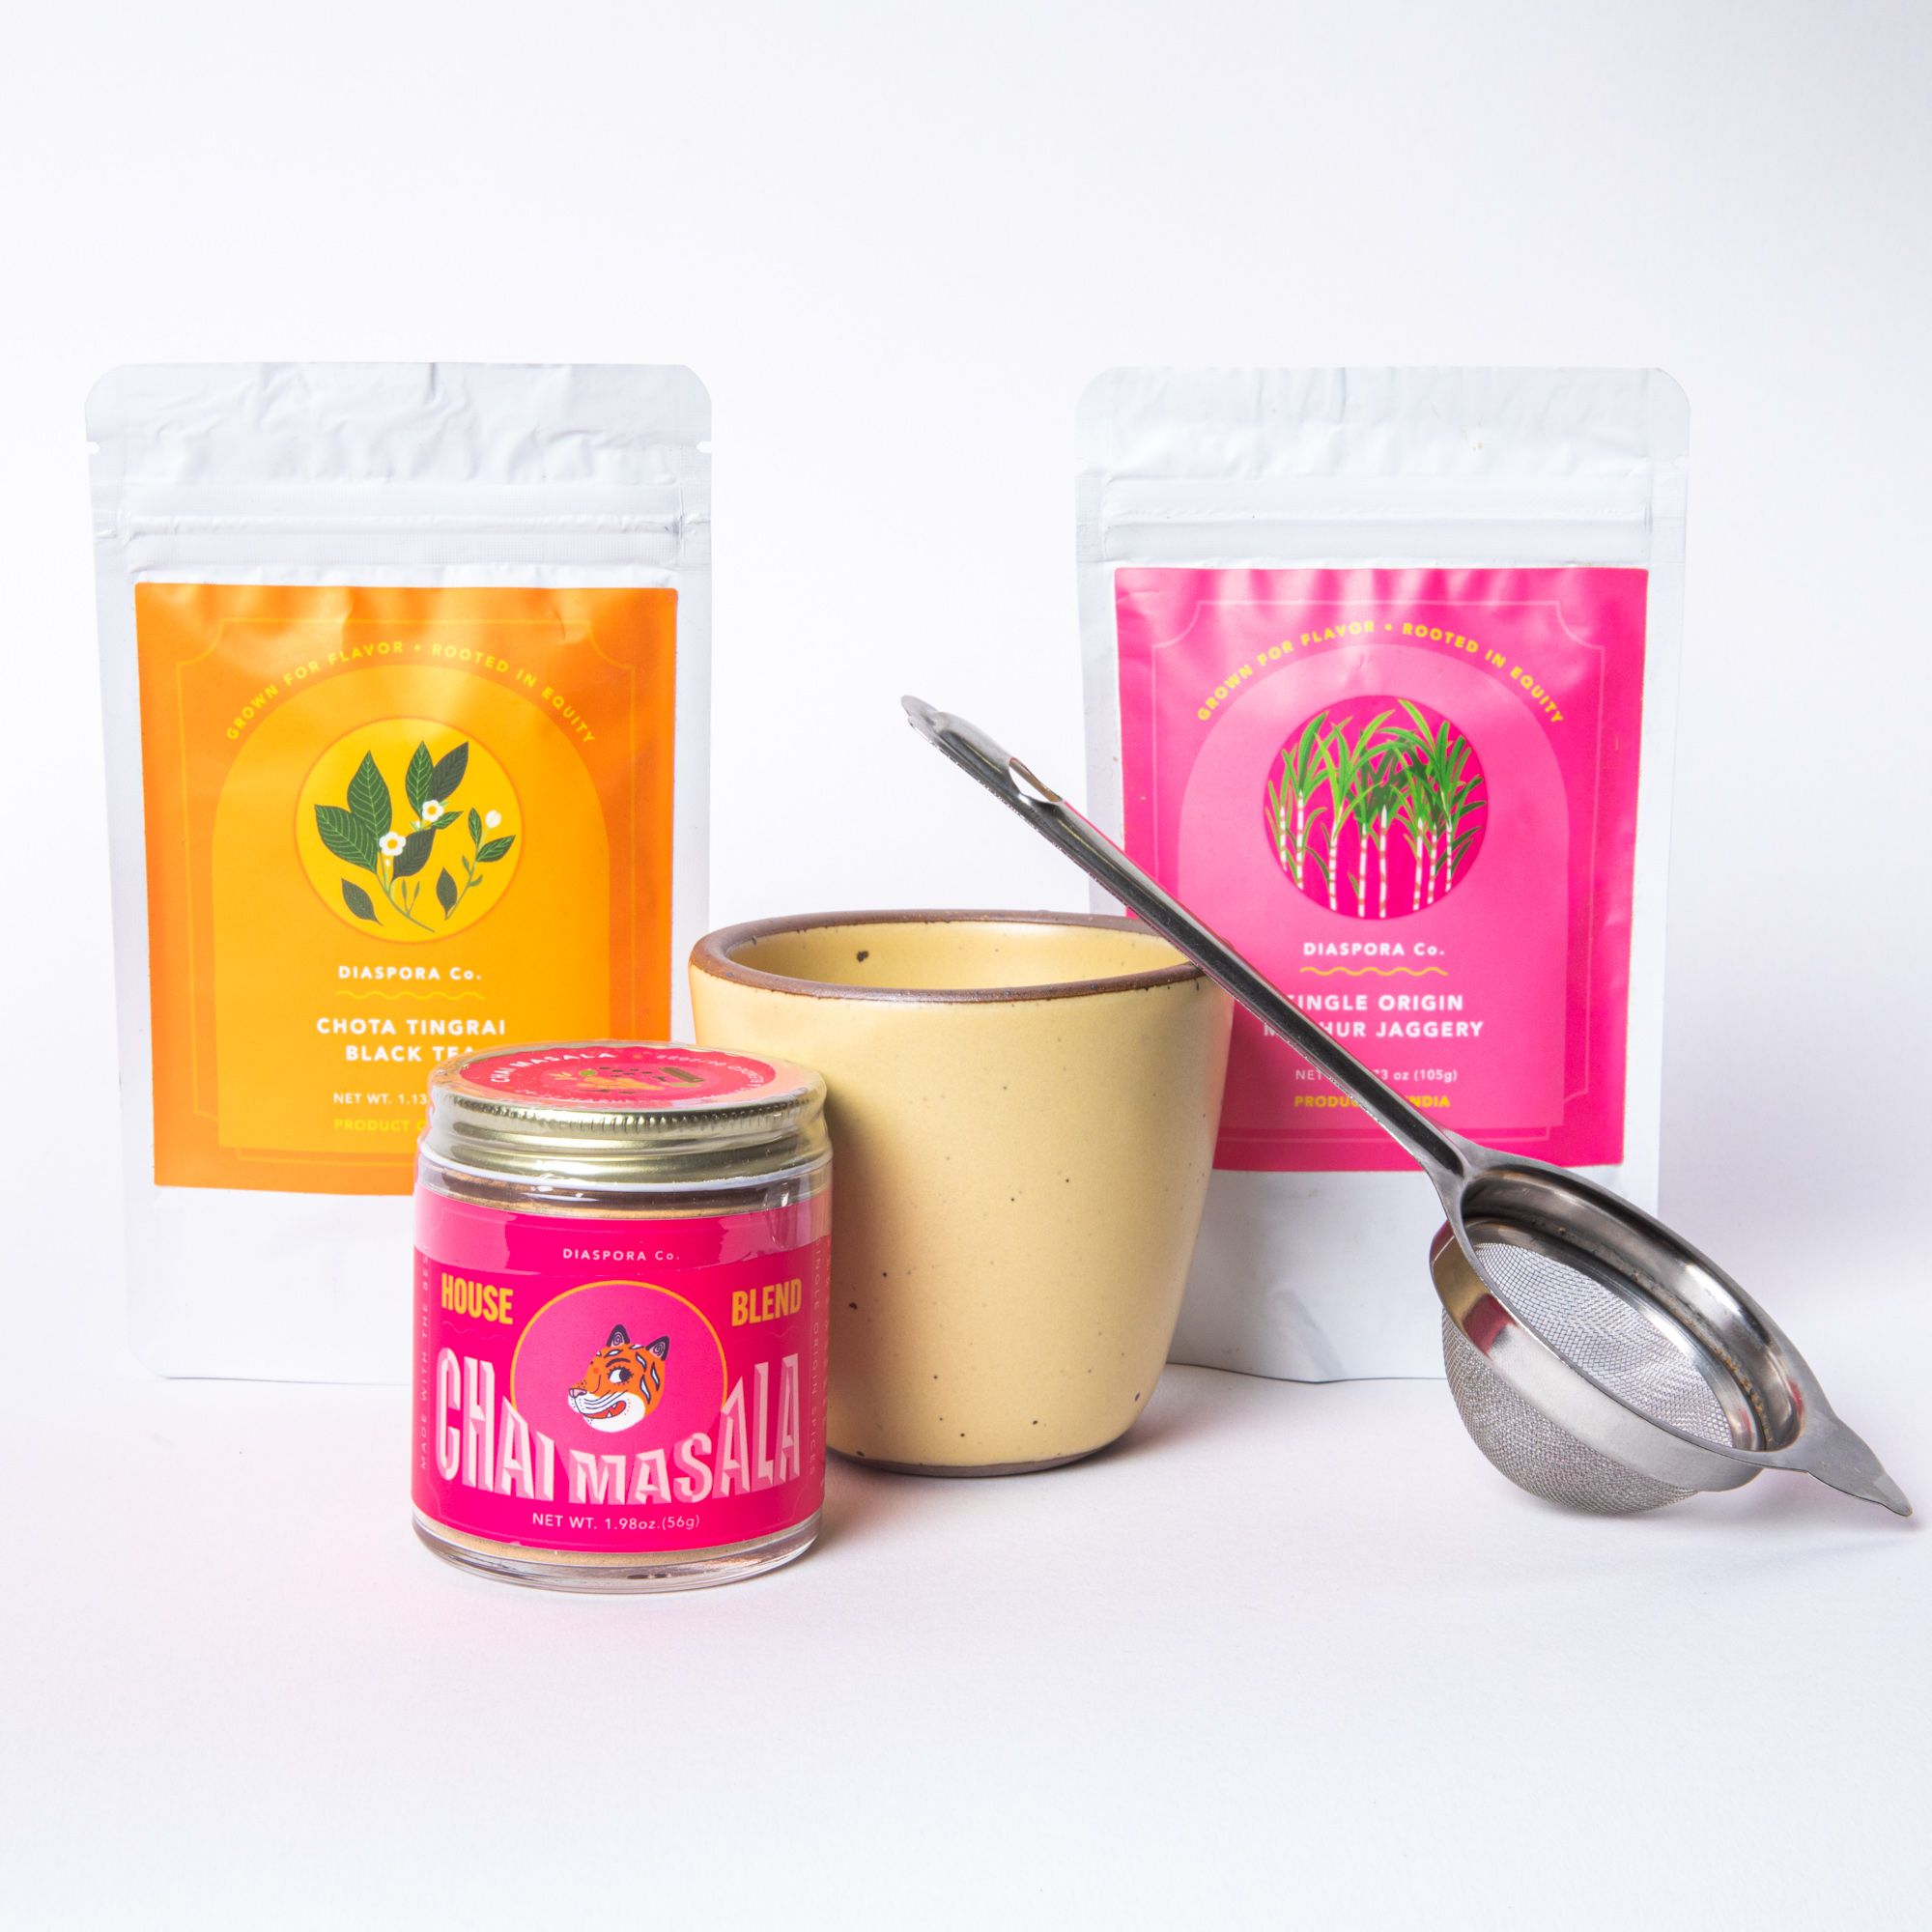 A chai bundle featuring a soft butter yellow kulhad, a tea strainer, a pink jar of chai masala, and 2 packages of jaggery and black tea